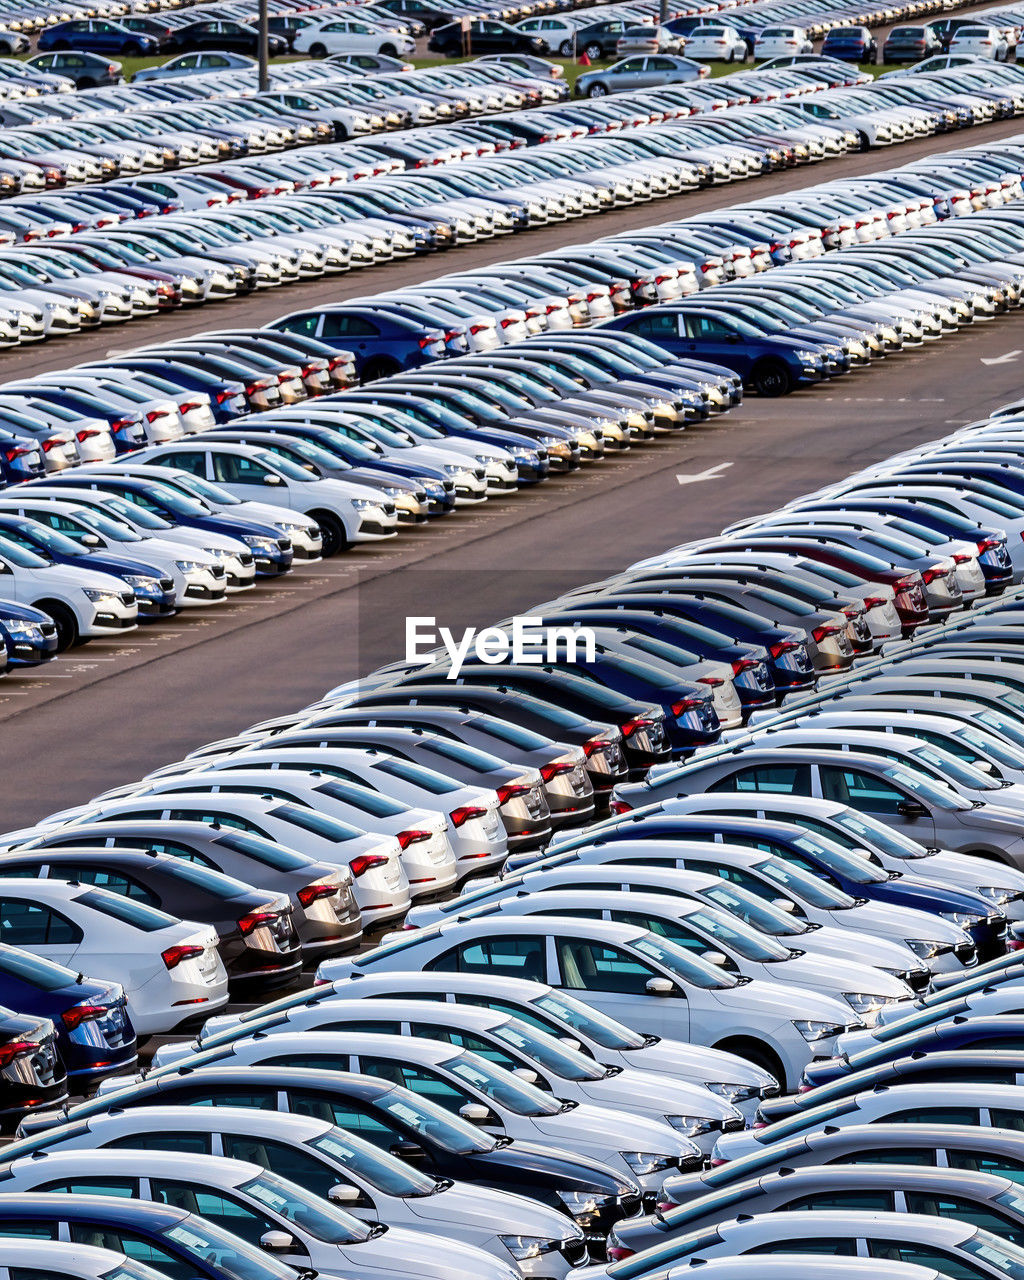 in a row, stadium, large group of objects, sport venue, high angle view, transportation, no people, order, race track, abundance, full frame, repetition, mode of transportation, day, architecture, motor vehicle, backgrounds, transport, car, vehicle, parking lot, city, outdoors, business, arrangement, side by side, arena, traffic congestion